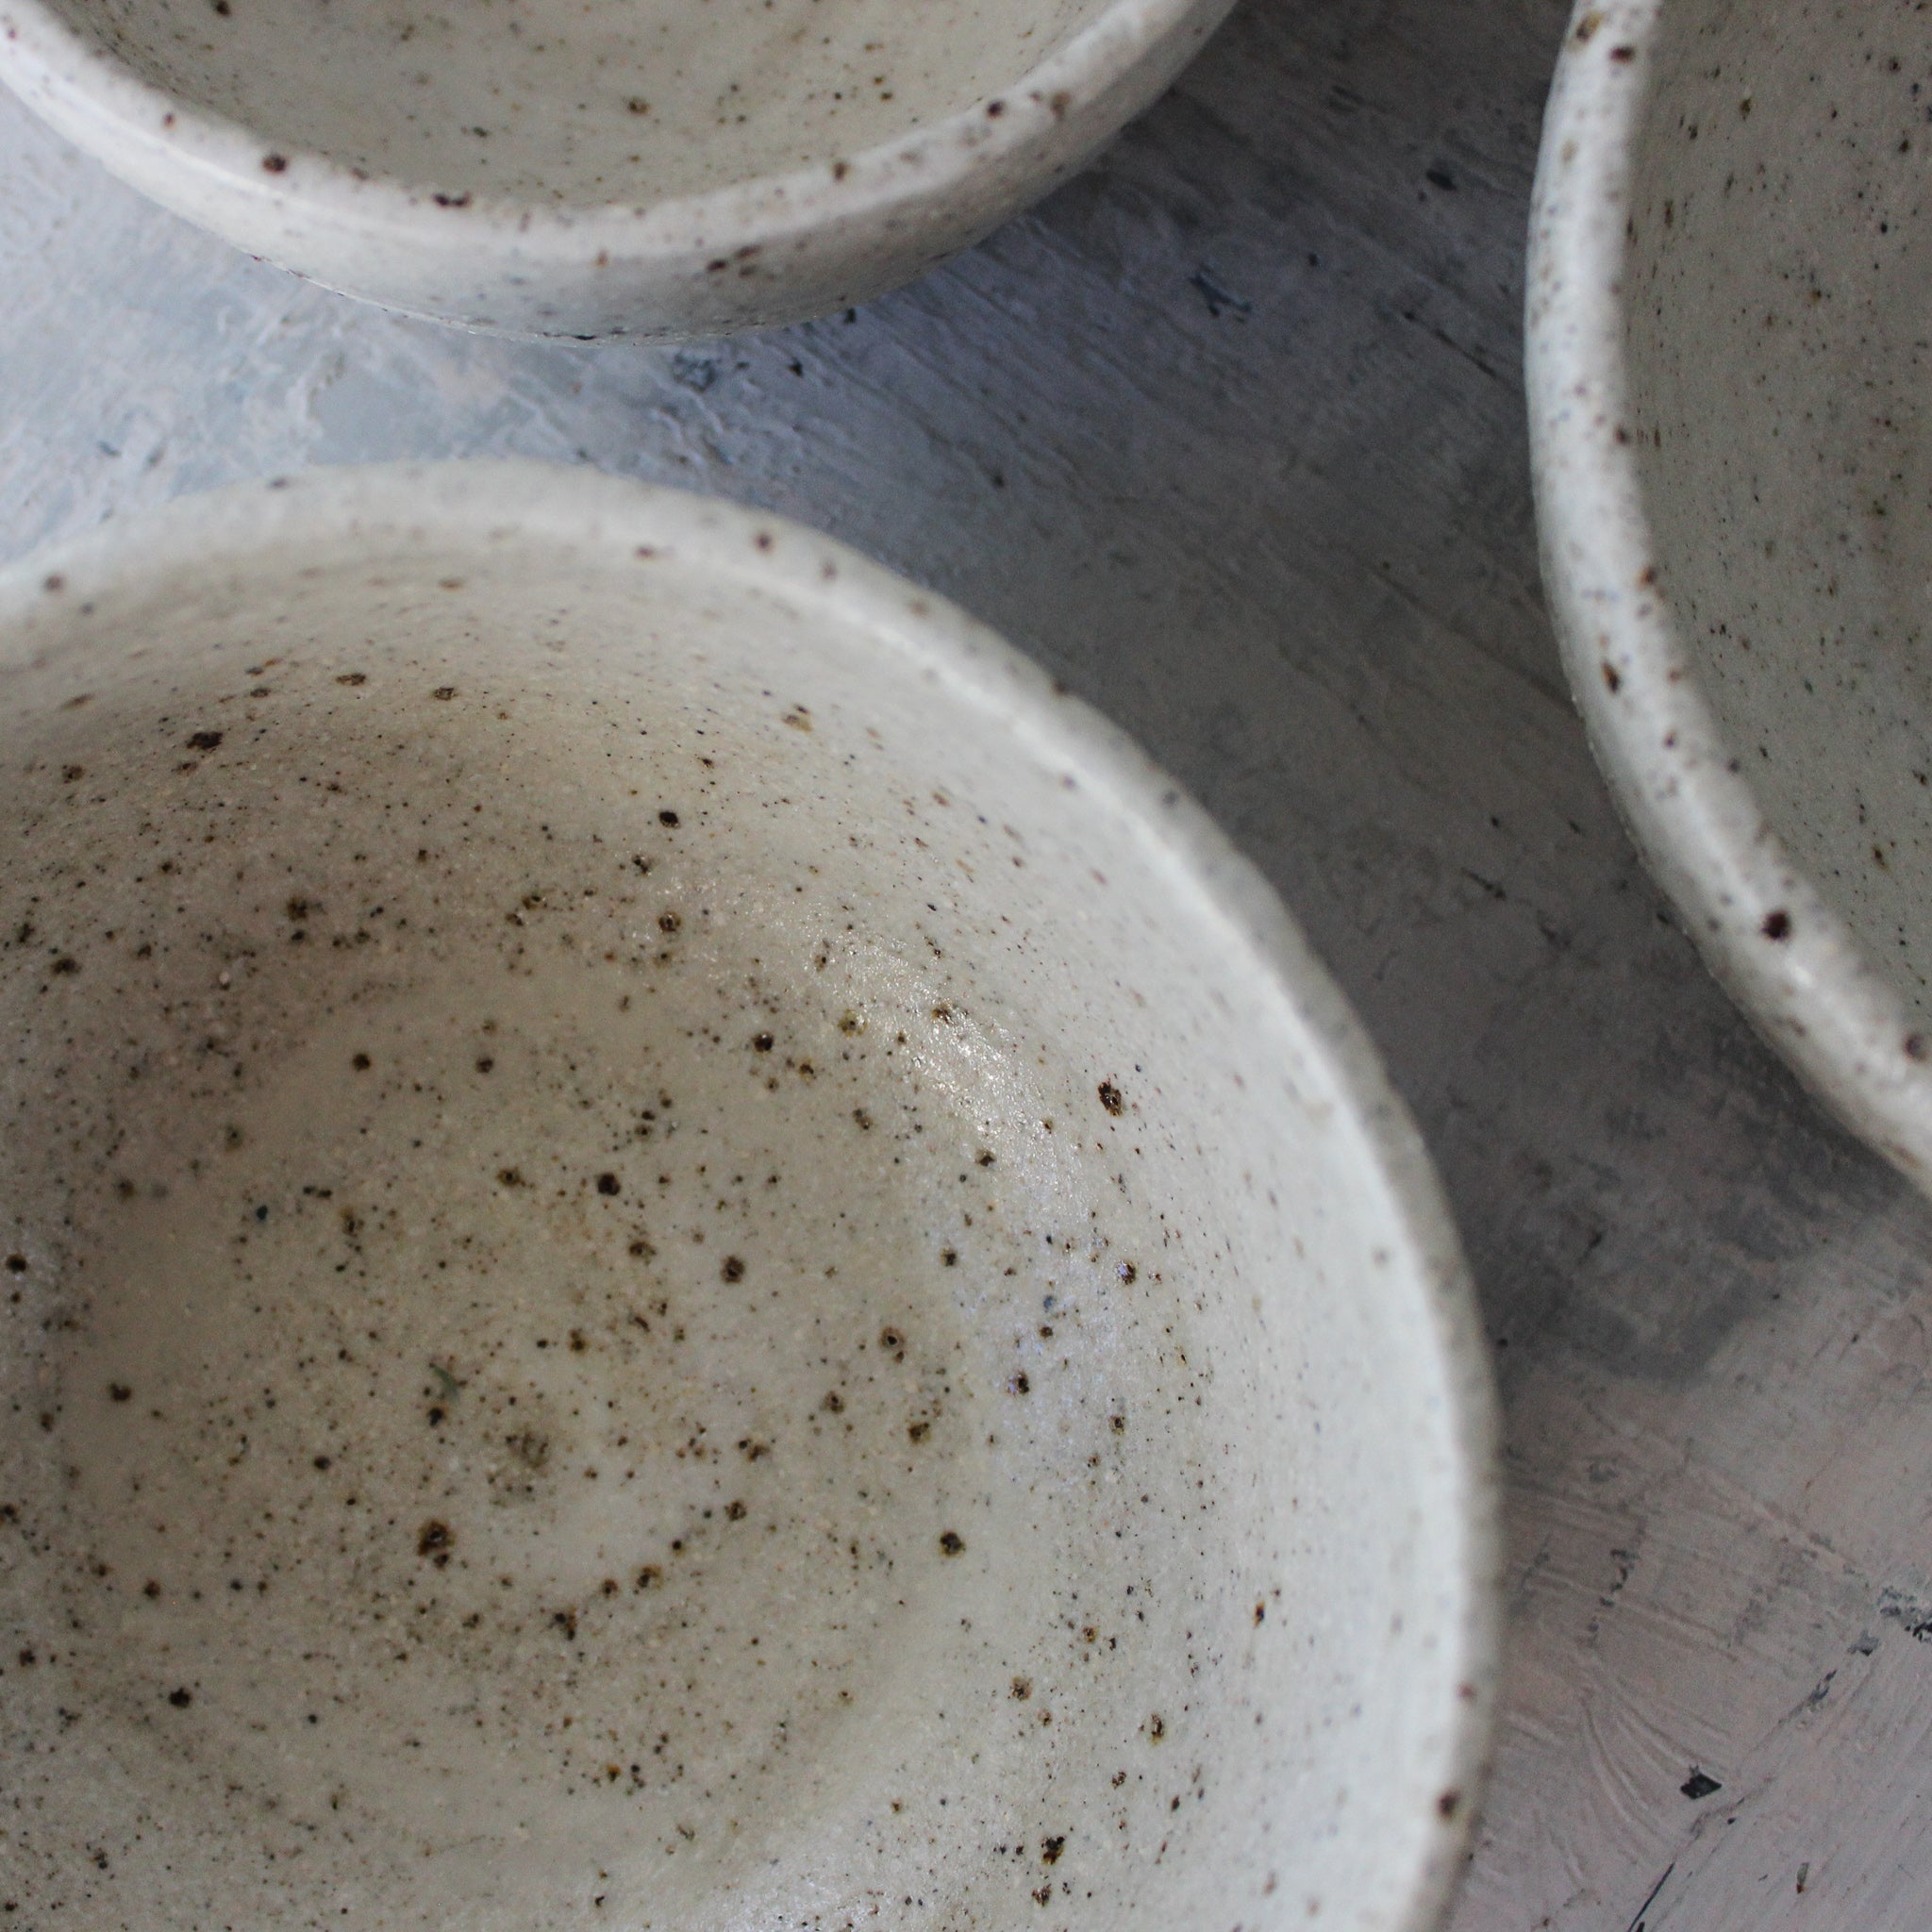 Marbled Ceramic Breakfast Bowls - Tribe Castlemaine